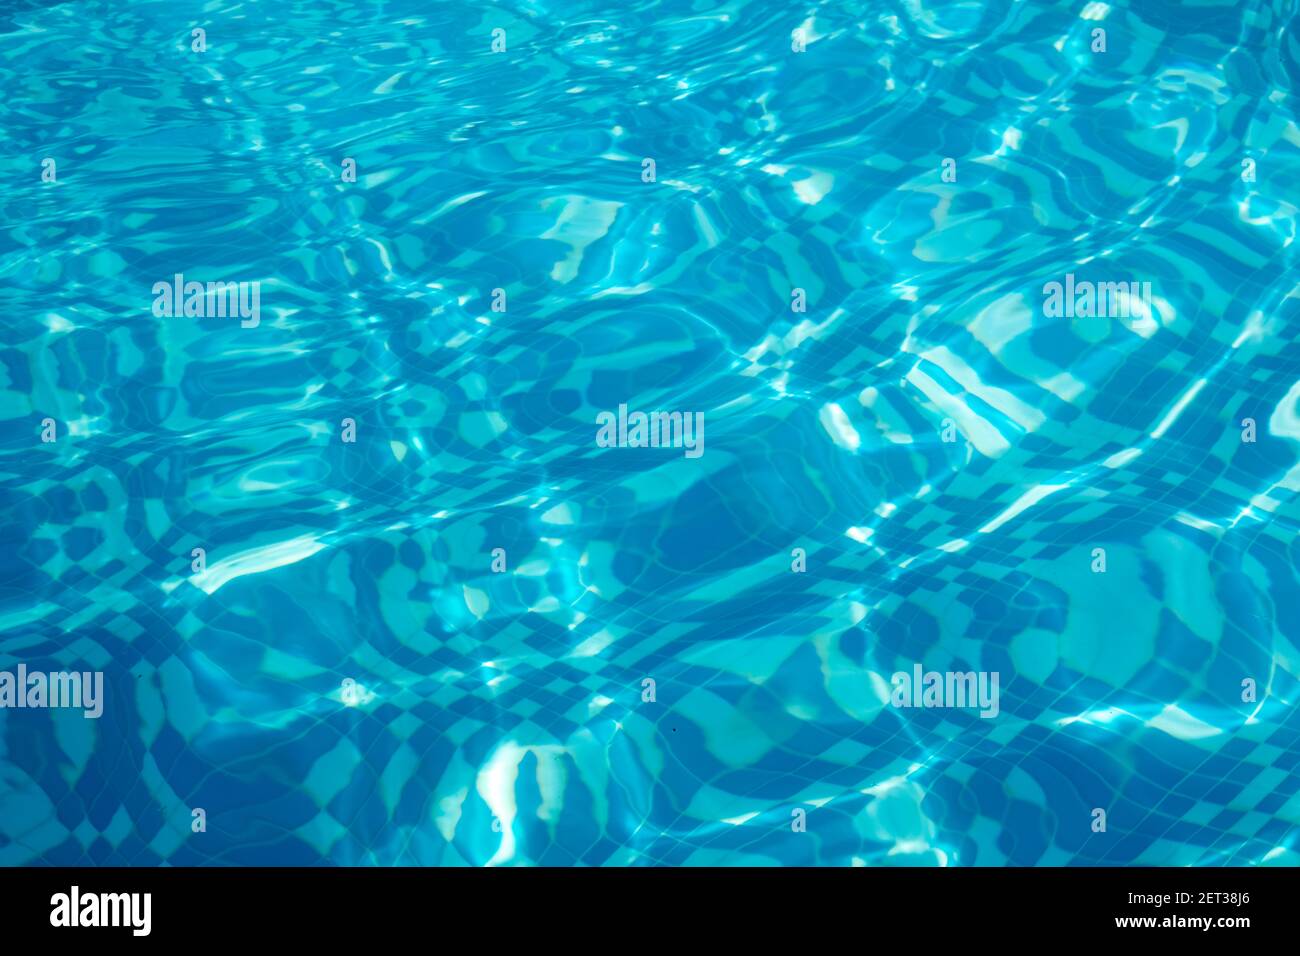 Blue water in a clean pool. Background Stock Photo